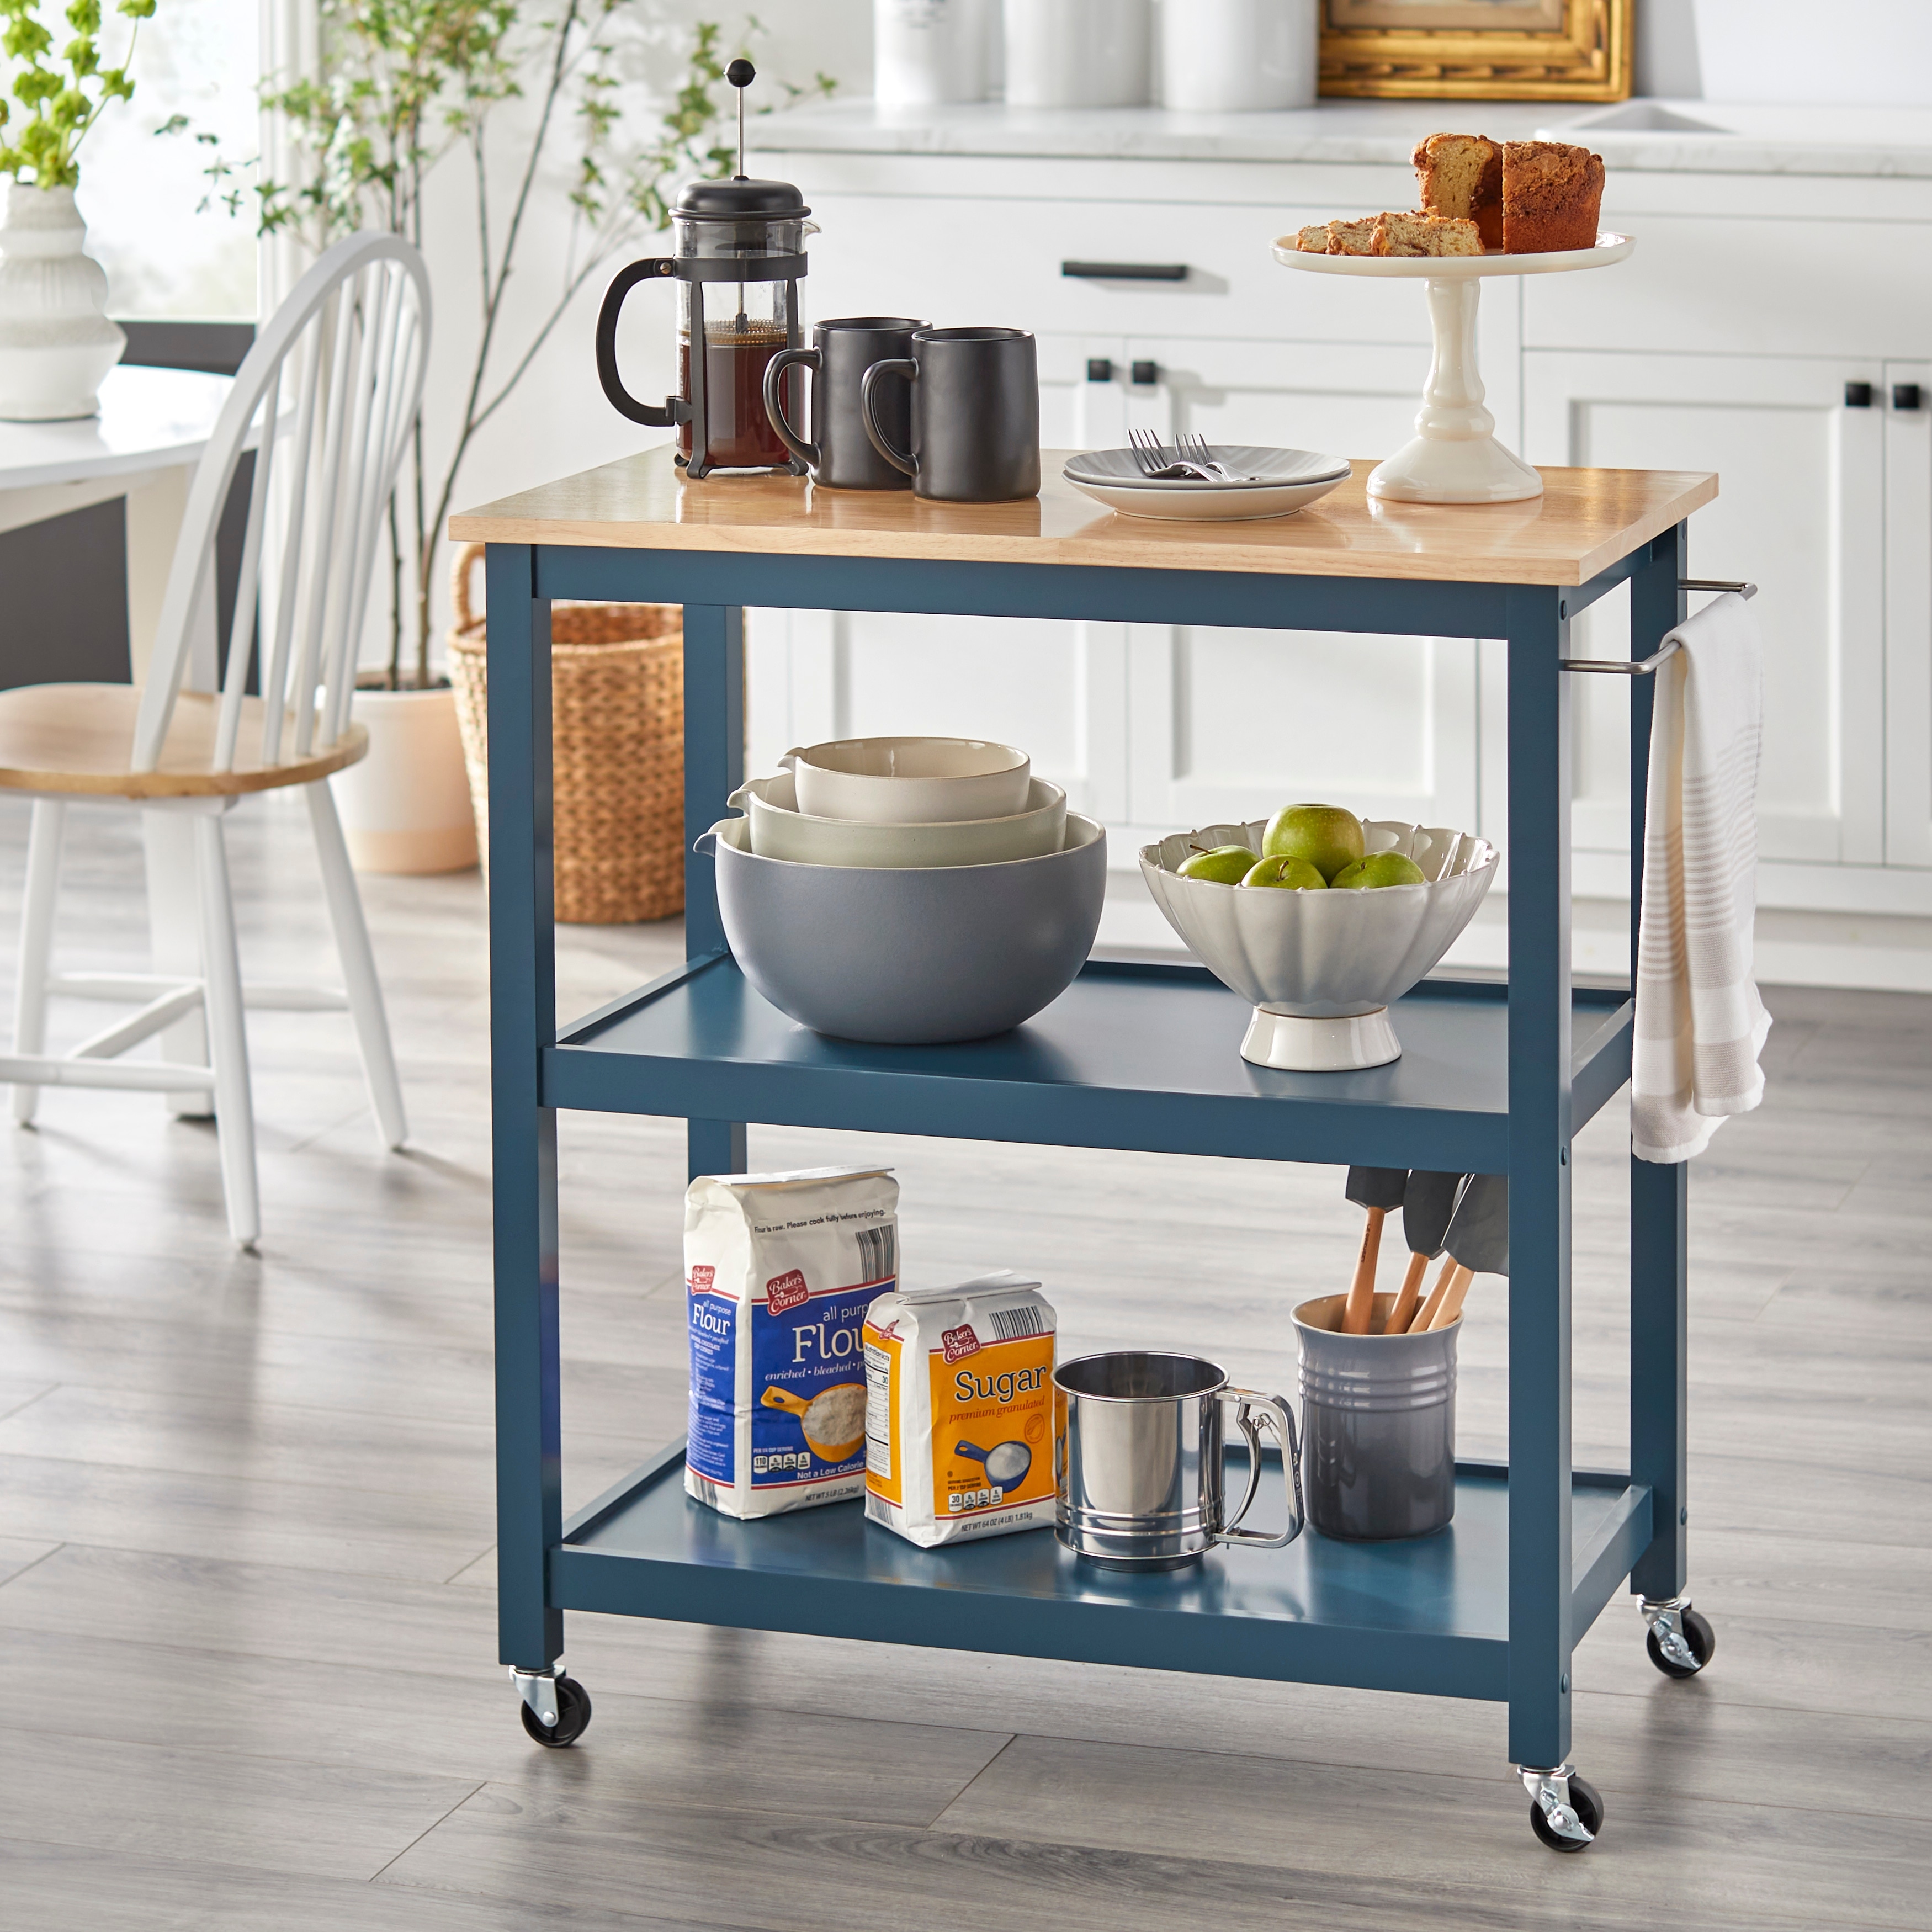 https://ak1.ostkcdn.com/images/products/is/images/direct/05f81ca37bf26f449e212e67d188a5c81665e4b5/Simple-Living-Janelle-Rolling-Kitchen-Cart.jpg